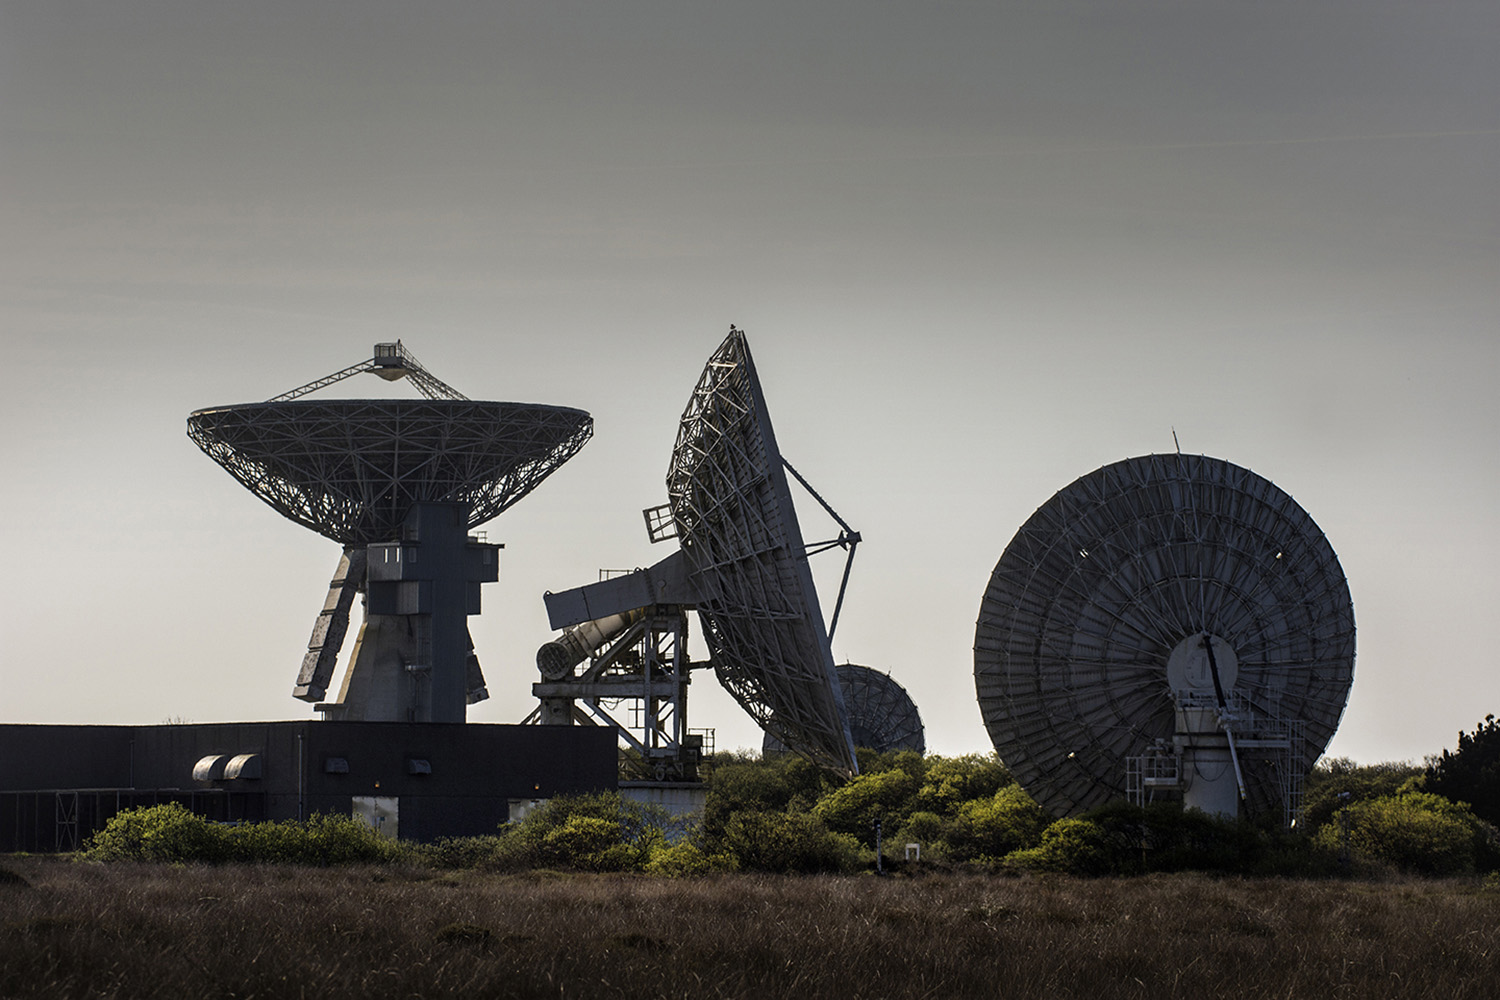 Silhouettes of satellite dishes at Goonhilly Earth Station